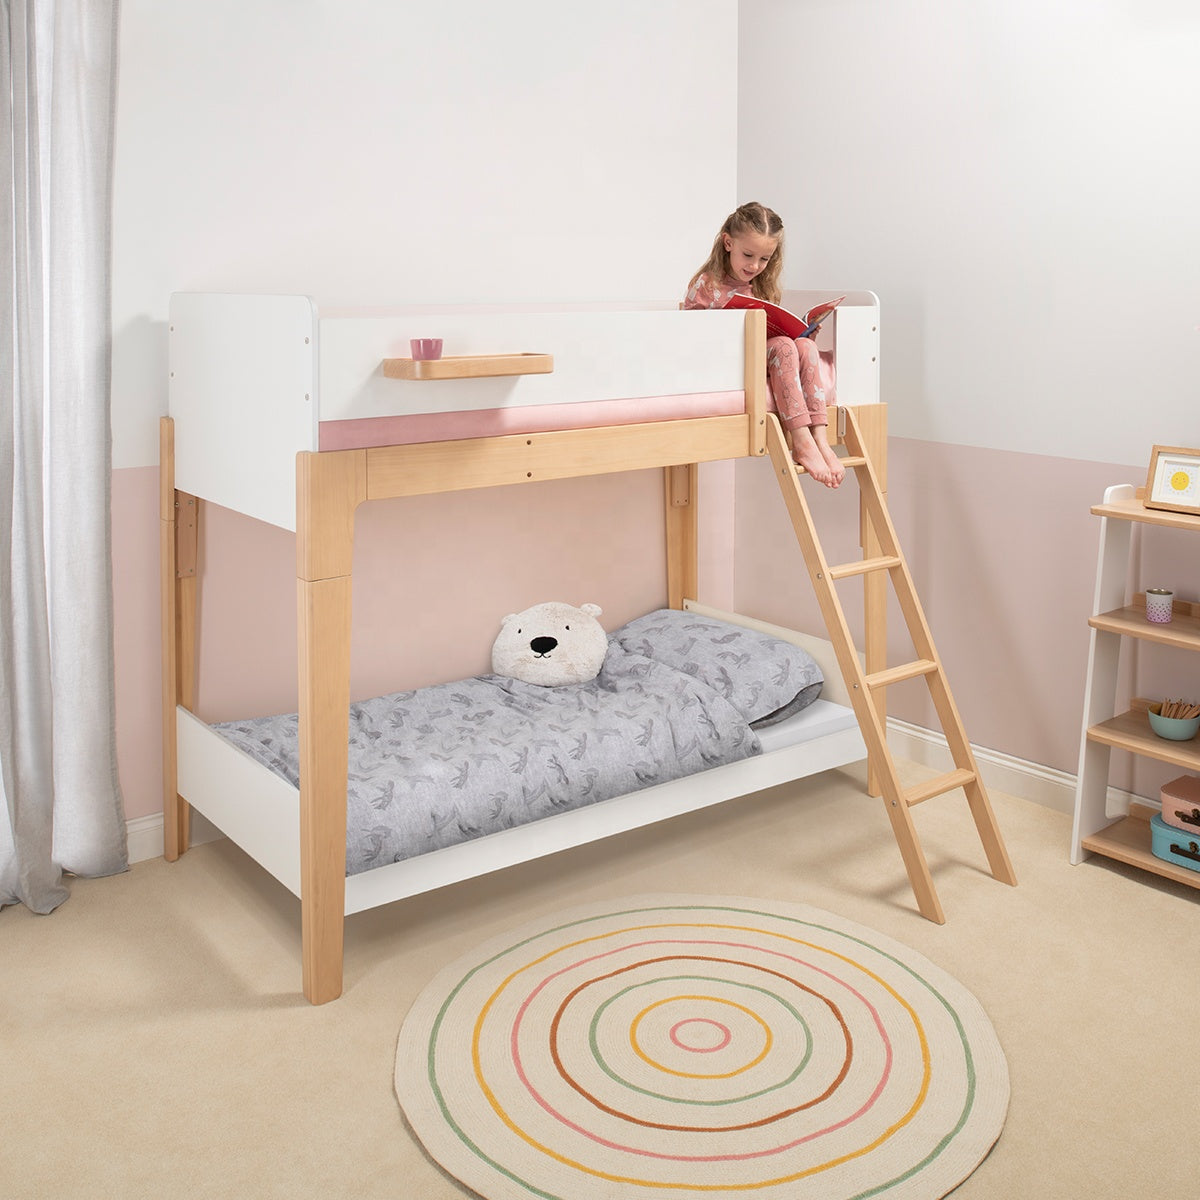 Barley White & Almond, Bunk Bed in KL, Kids Beds, Kids beds frames, kids single bed, space saving kids beds, double-decker bed, kids bunk bed Malaysia